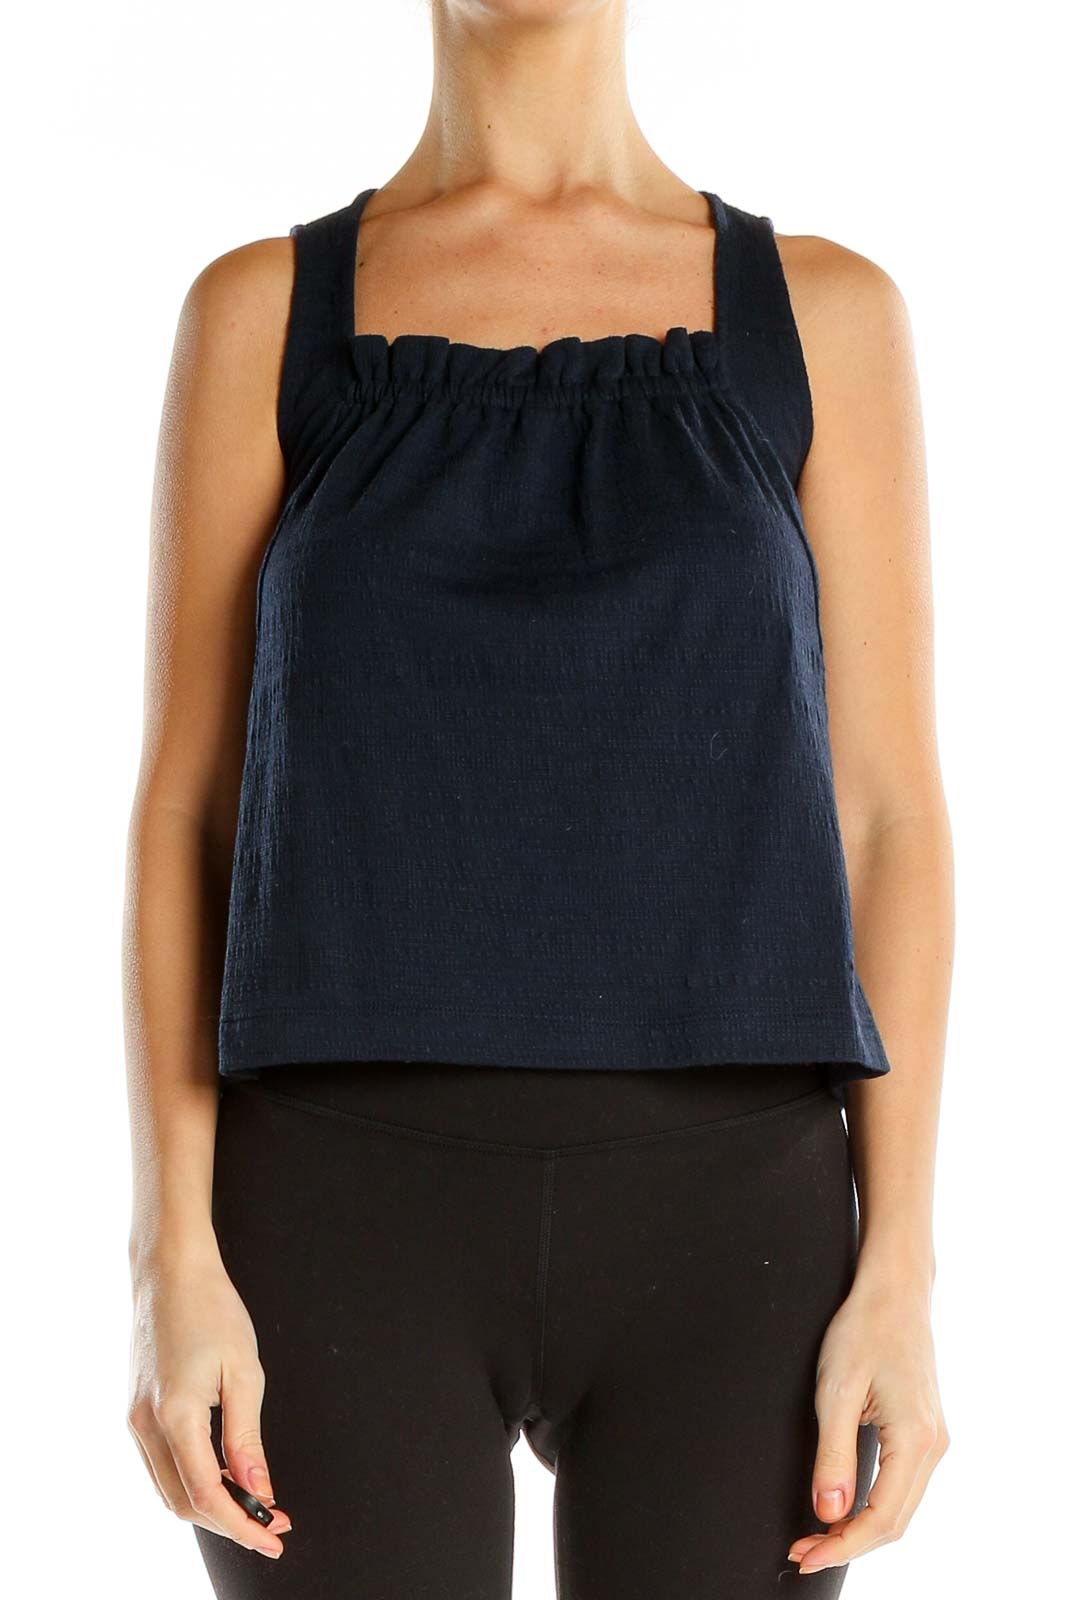 Blue Square Neck Chic Tank Top Front